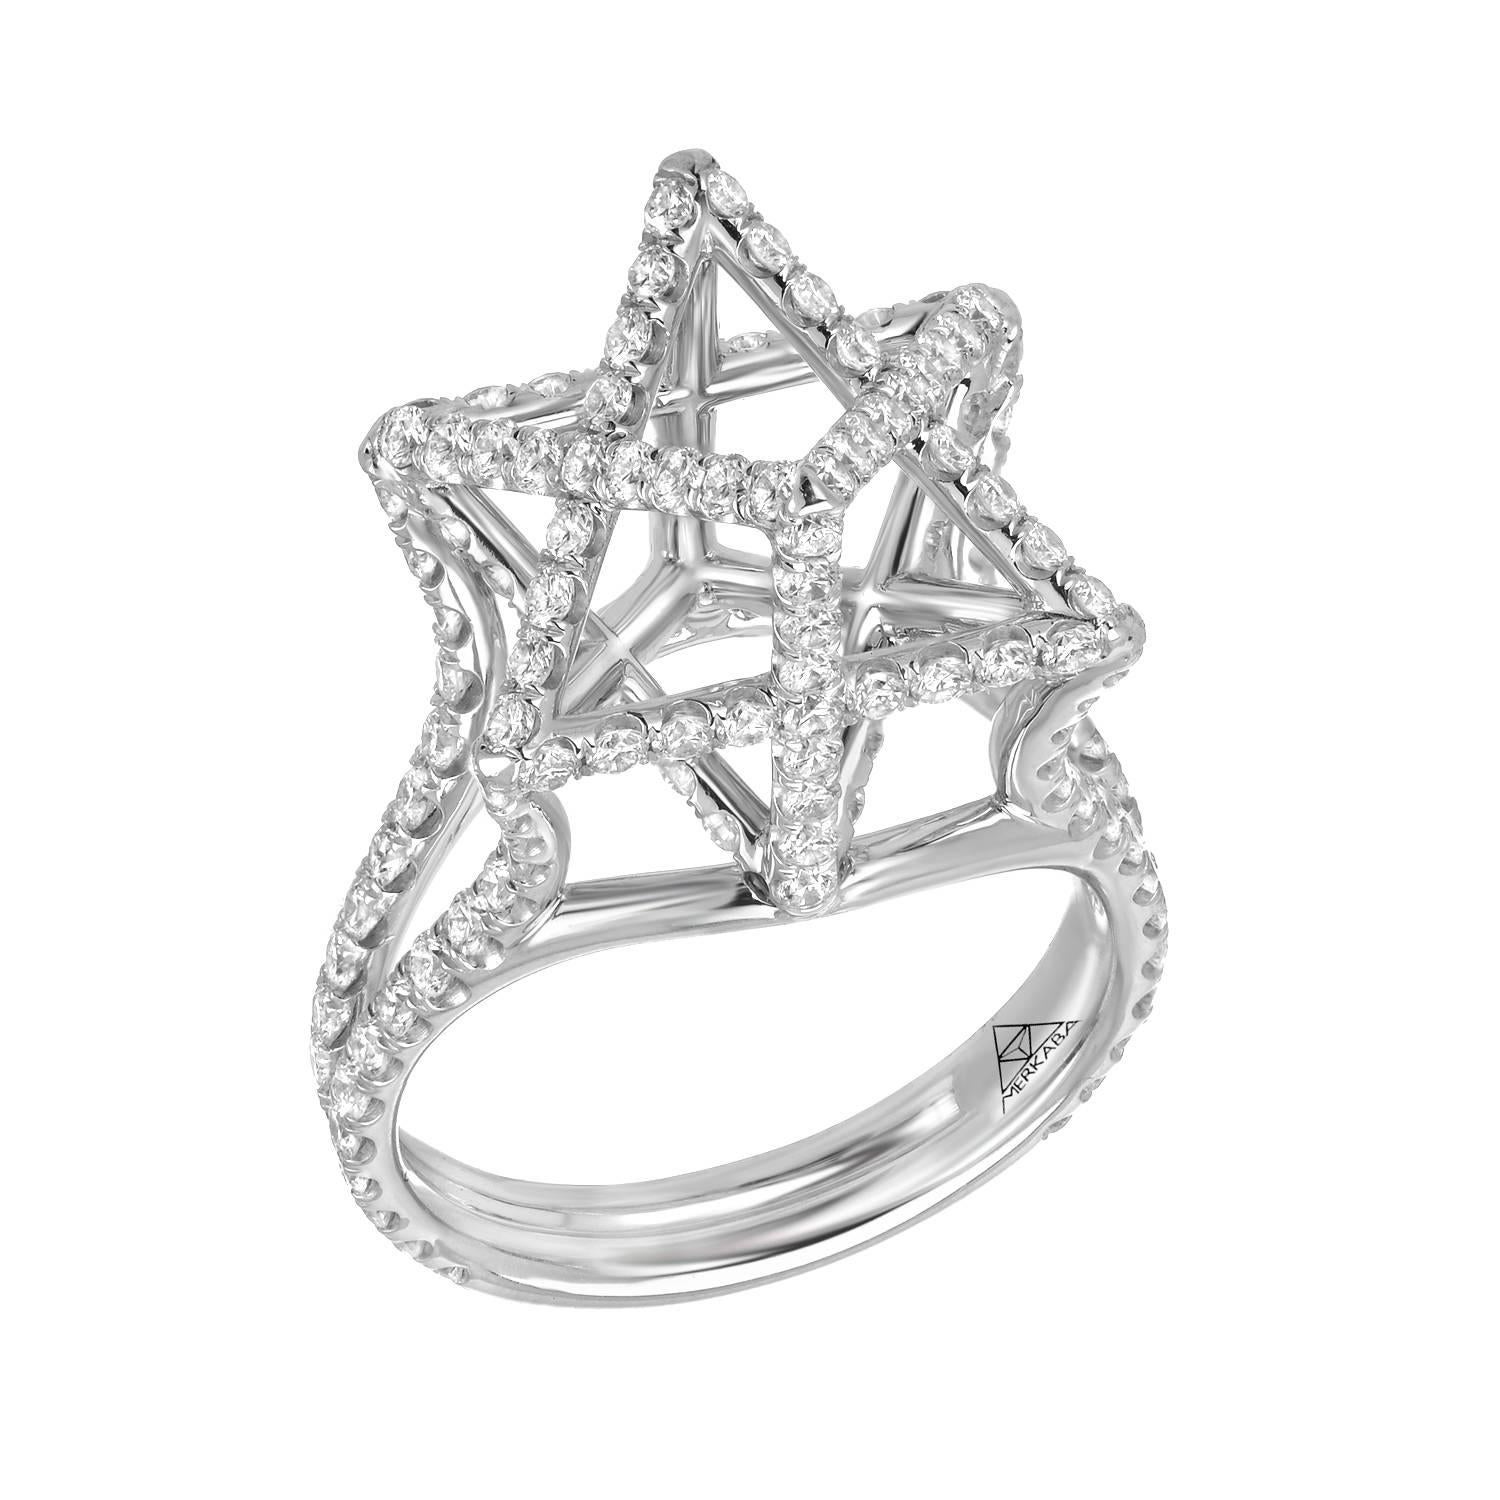 This heirloom-quality large platinum Merkaba ring features a total of approximately 2.02 carats of round brilliant diamonds, F-G color and VVS2-VS1 clarity. This three dimensional architectural design extends upward from the hand, 0.53 inches.
Each